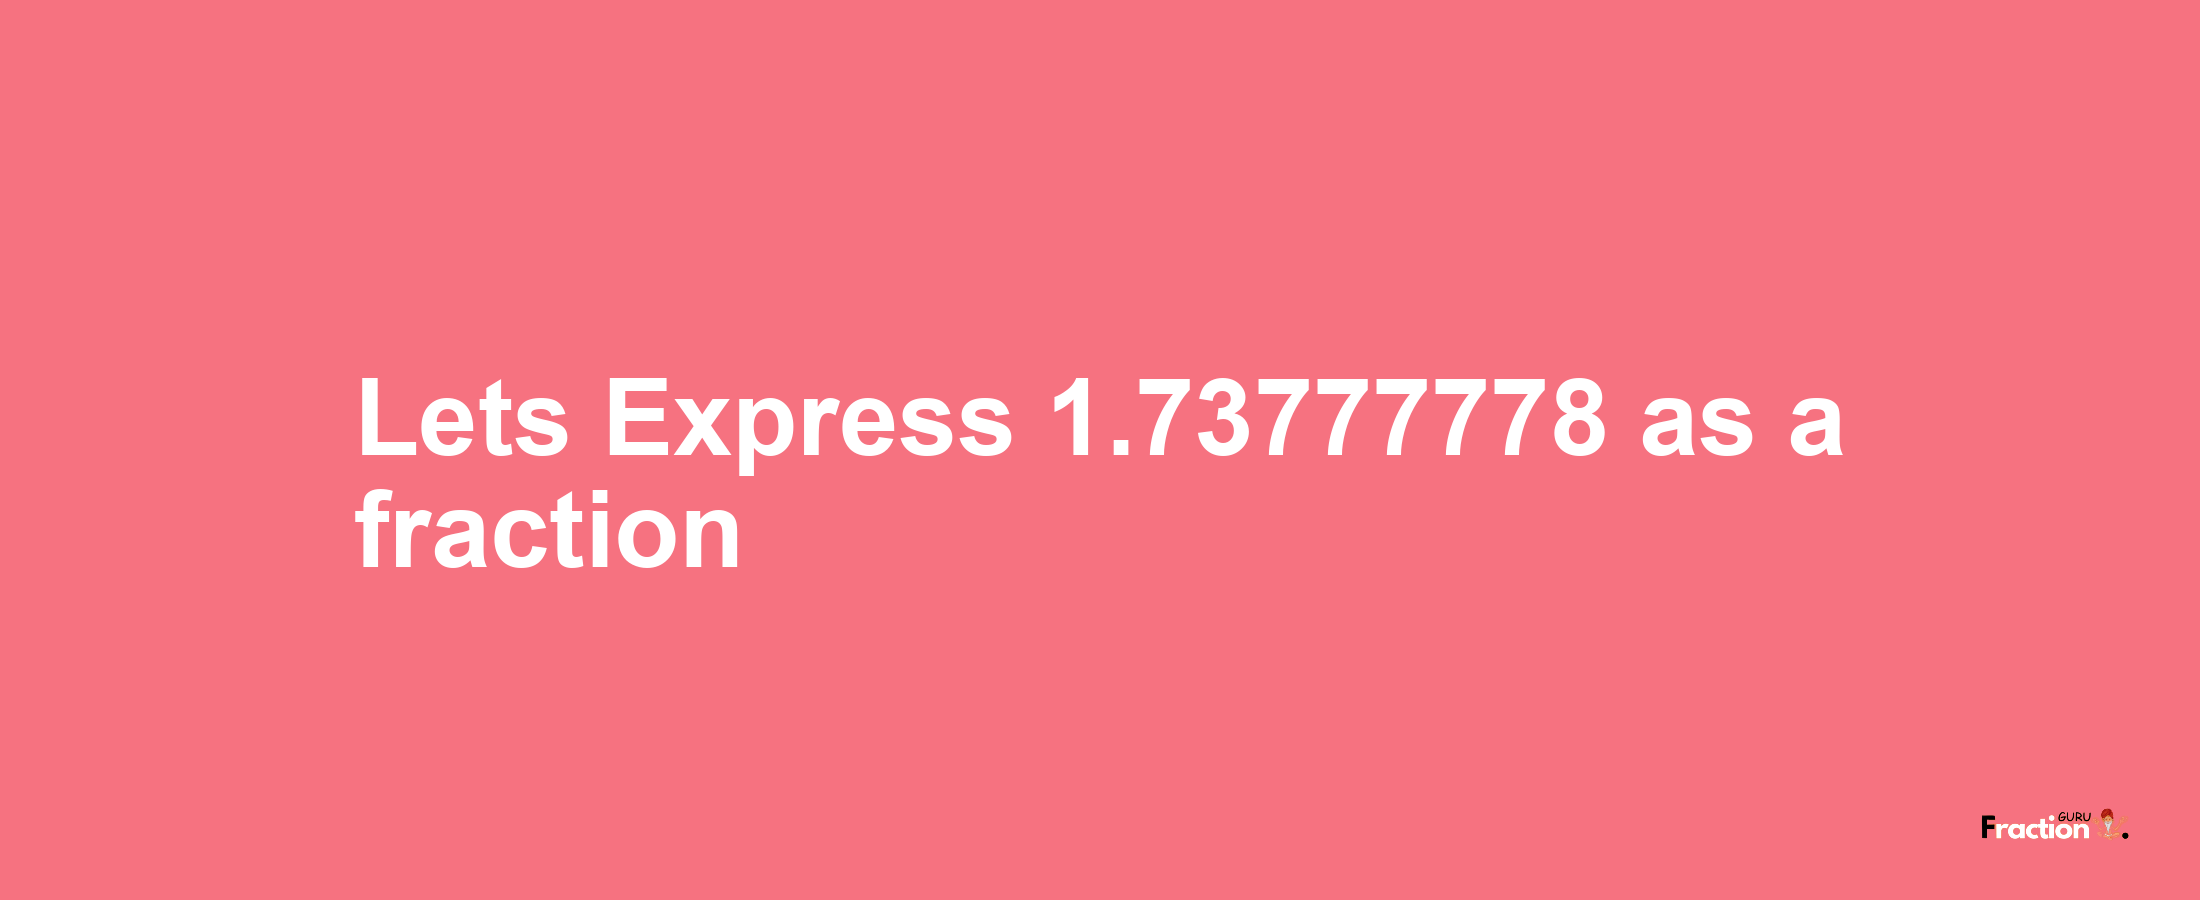 Lets Express 1.73777778 as afraction